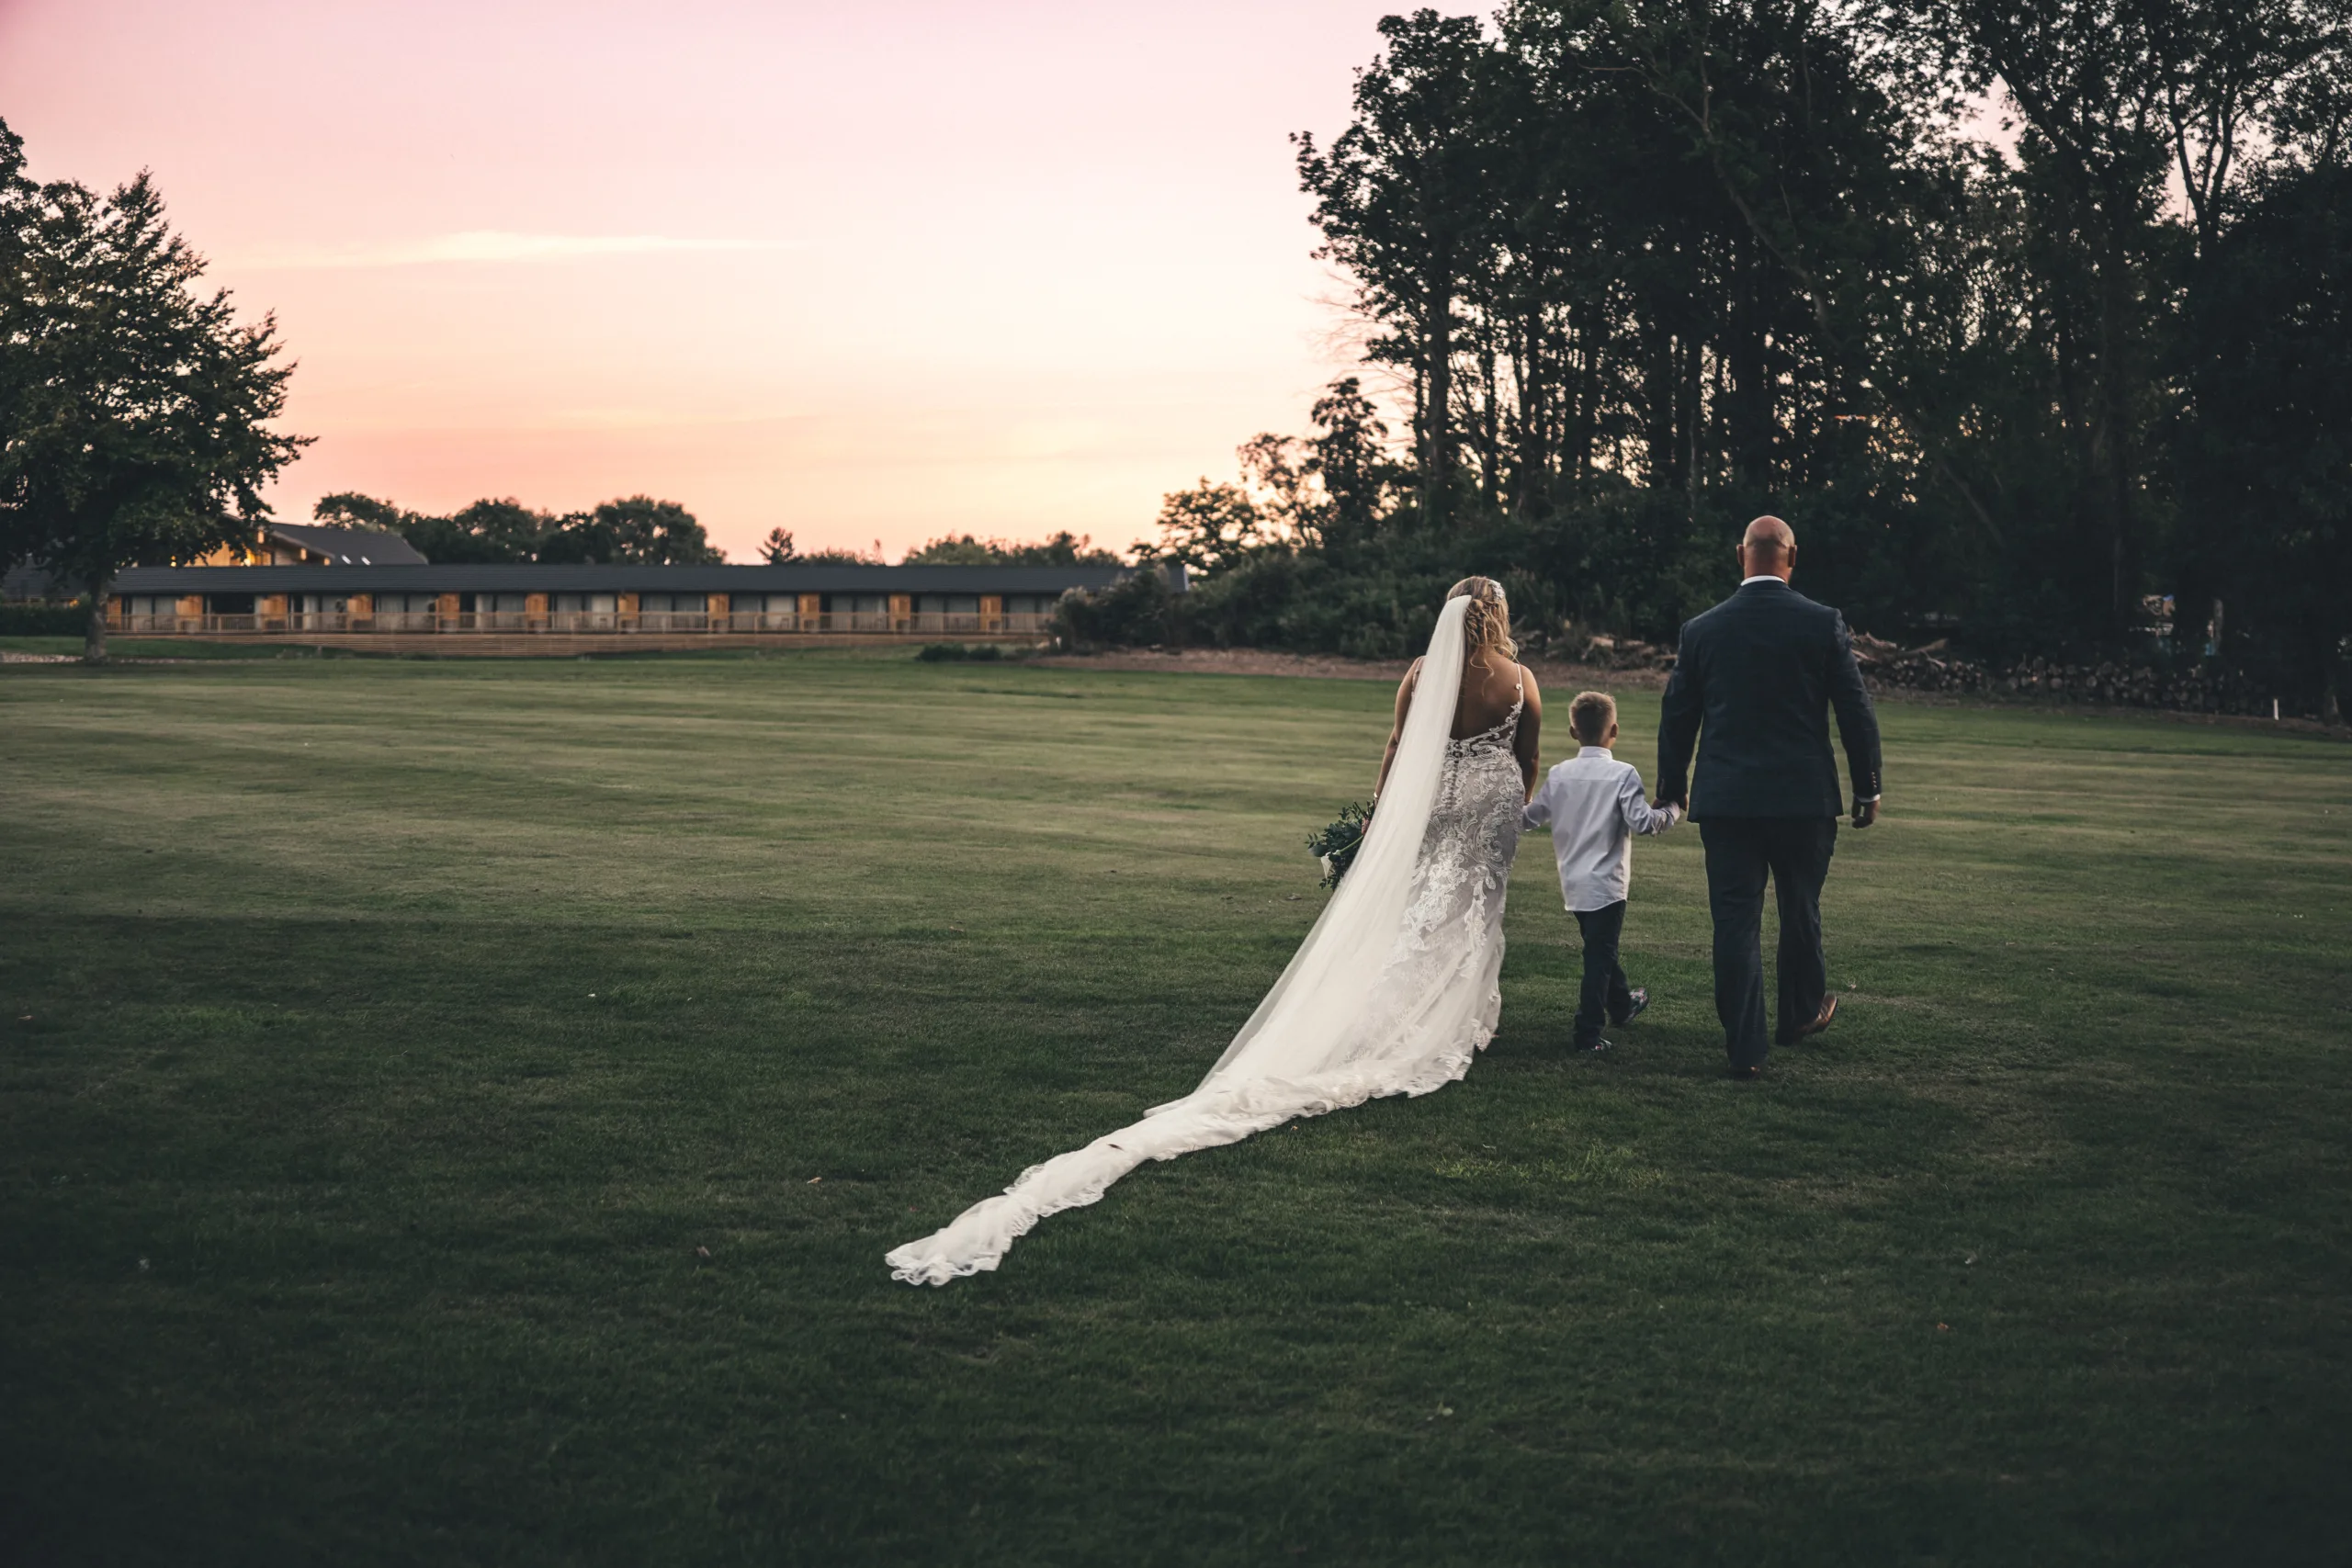 A bride and groom walking in a grassy field at sunset, captured beautifully through Yorkshire photography.